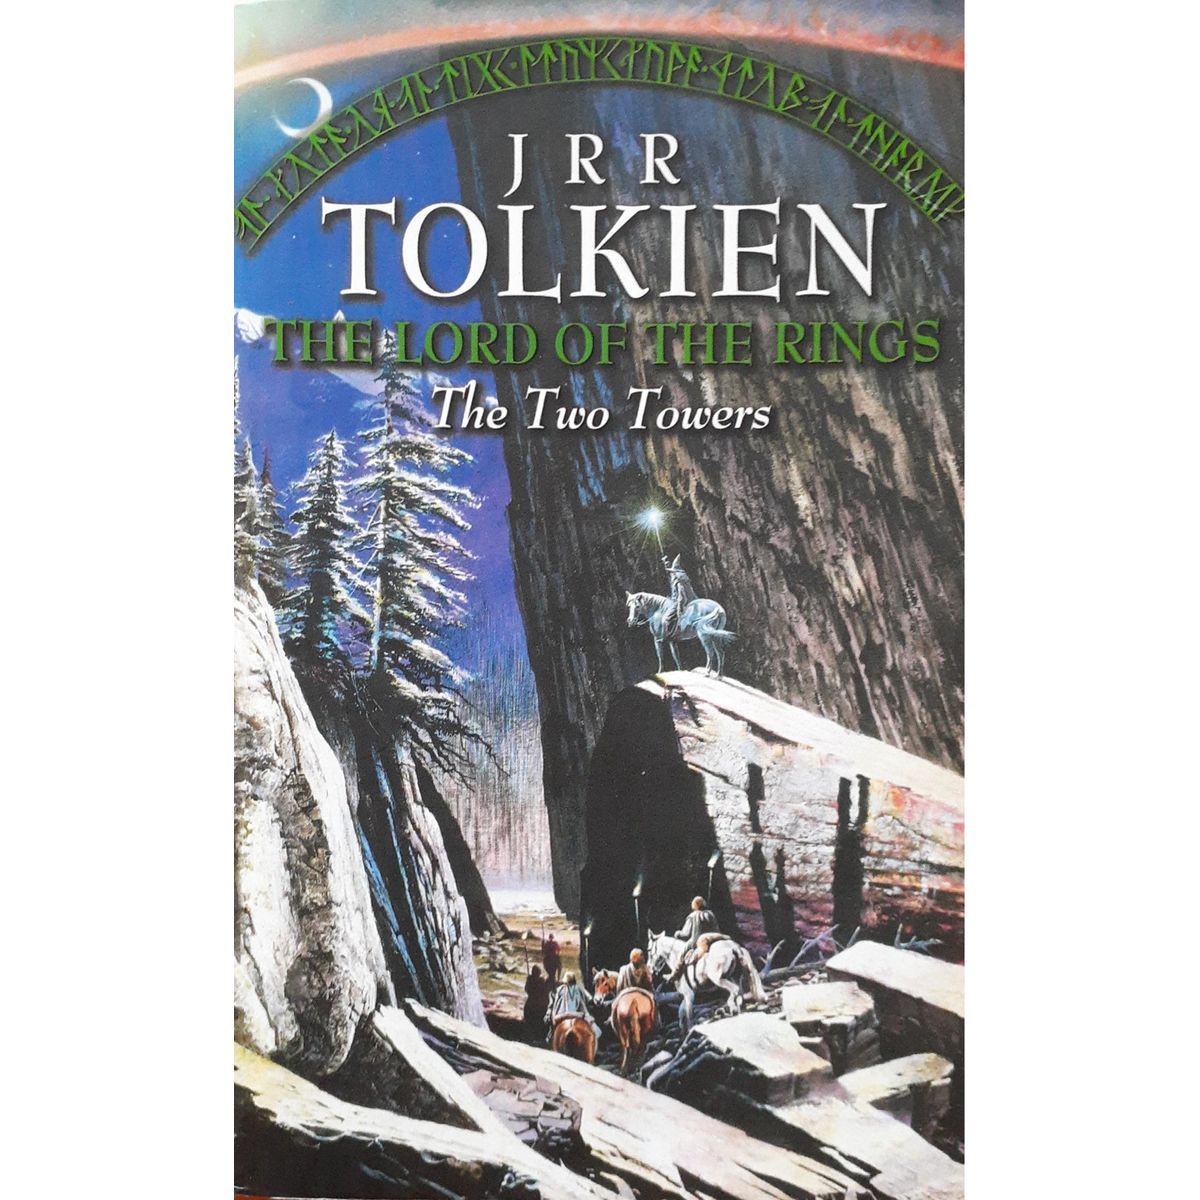 ISBN: 9780261102361 / 0261102362 - The Two Towers by J.R.R. Tolkien [1999]